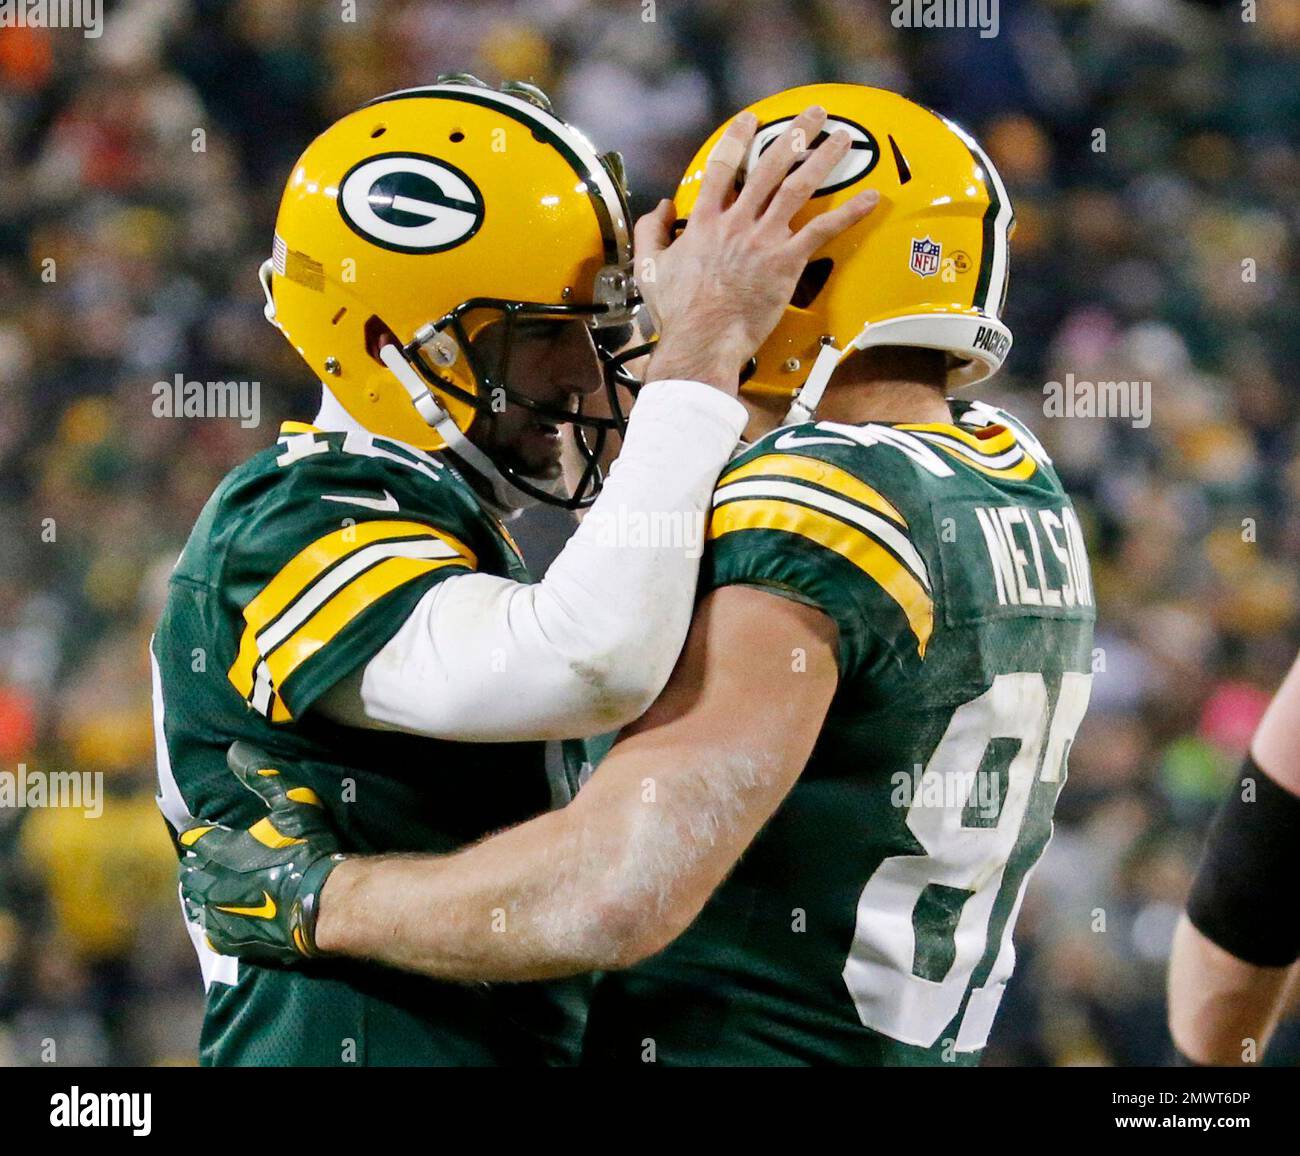 FILE - In this Dec. 11, 2016, file photo, Green Bay Packers' Aaron Rodgers  congratulates Jordy Nelson after a touchdown catch during the second half  of an NFL football game against the